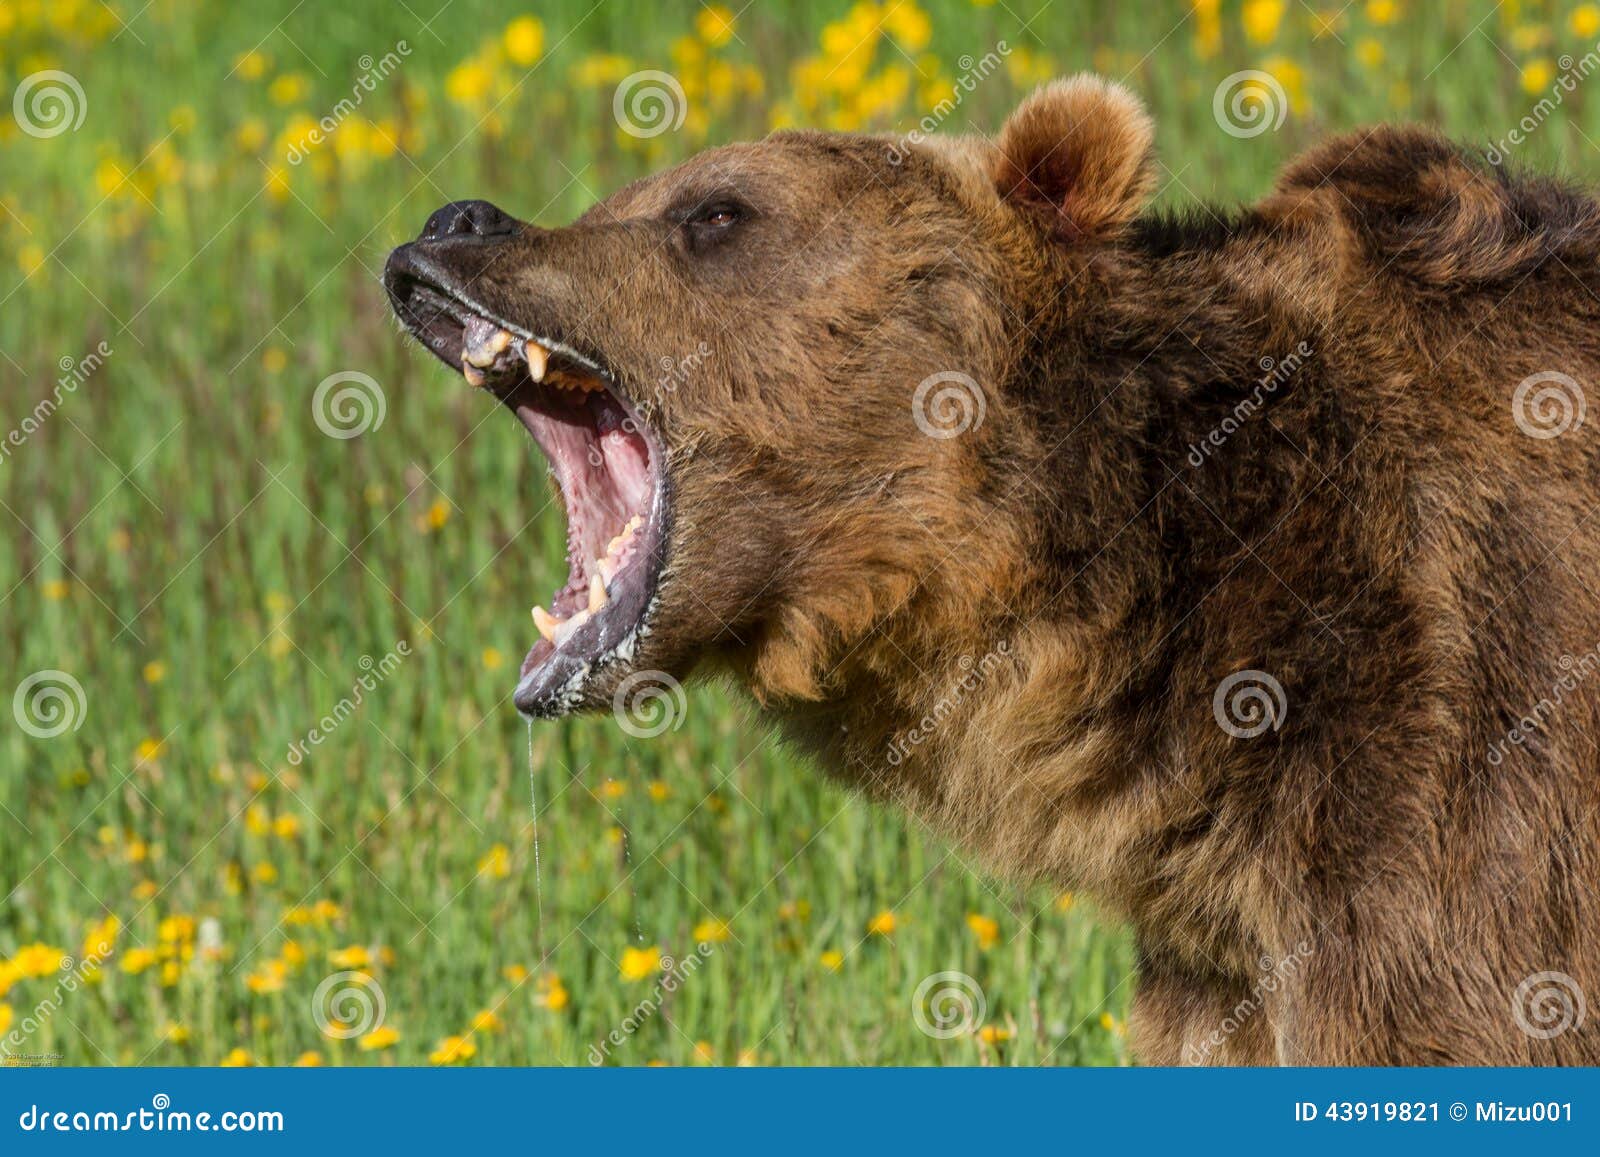 growling grizzly bear